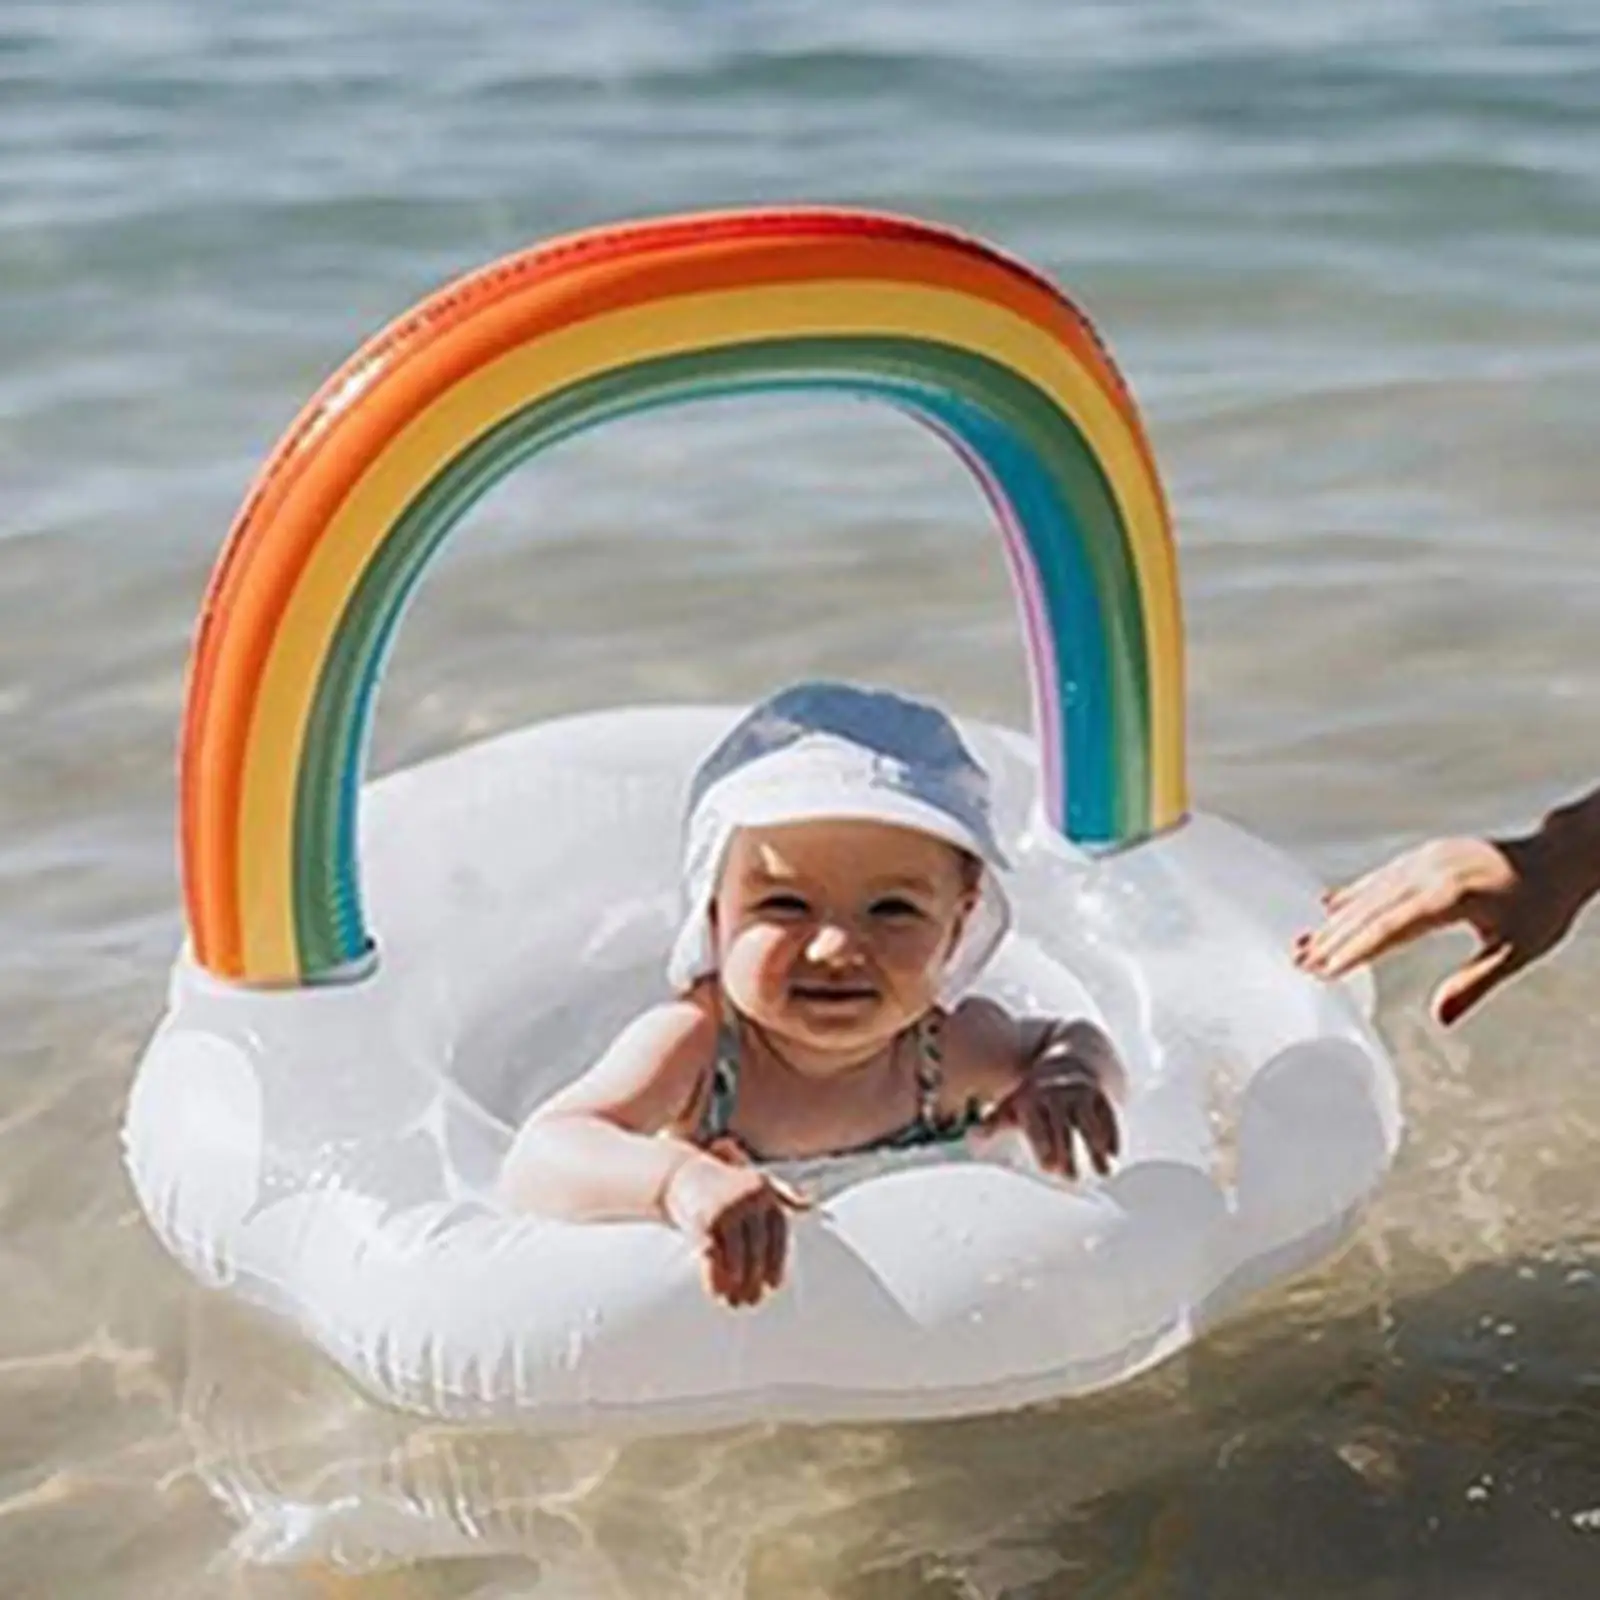 Rainbow Cloud Baby Swimming Ring with Seat Safety Training Swim Aid Toy Swim Rings for Kids Infant Newborn Toddlers Baby